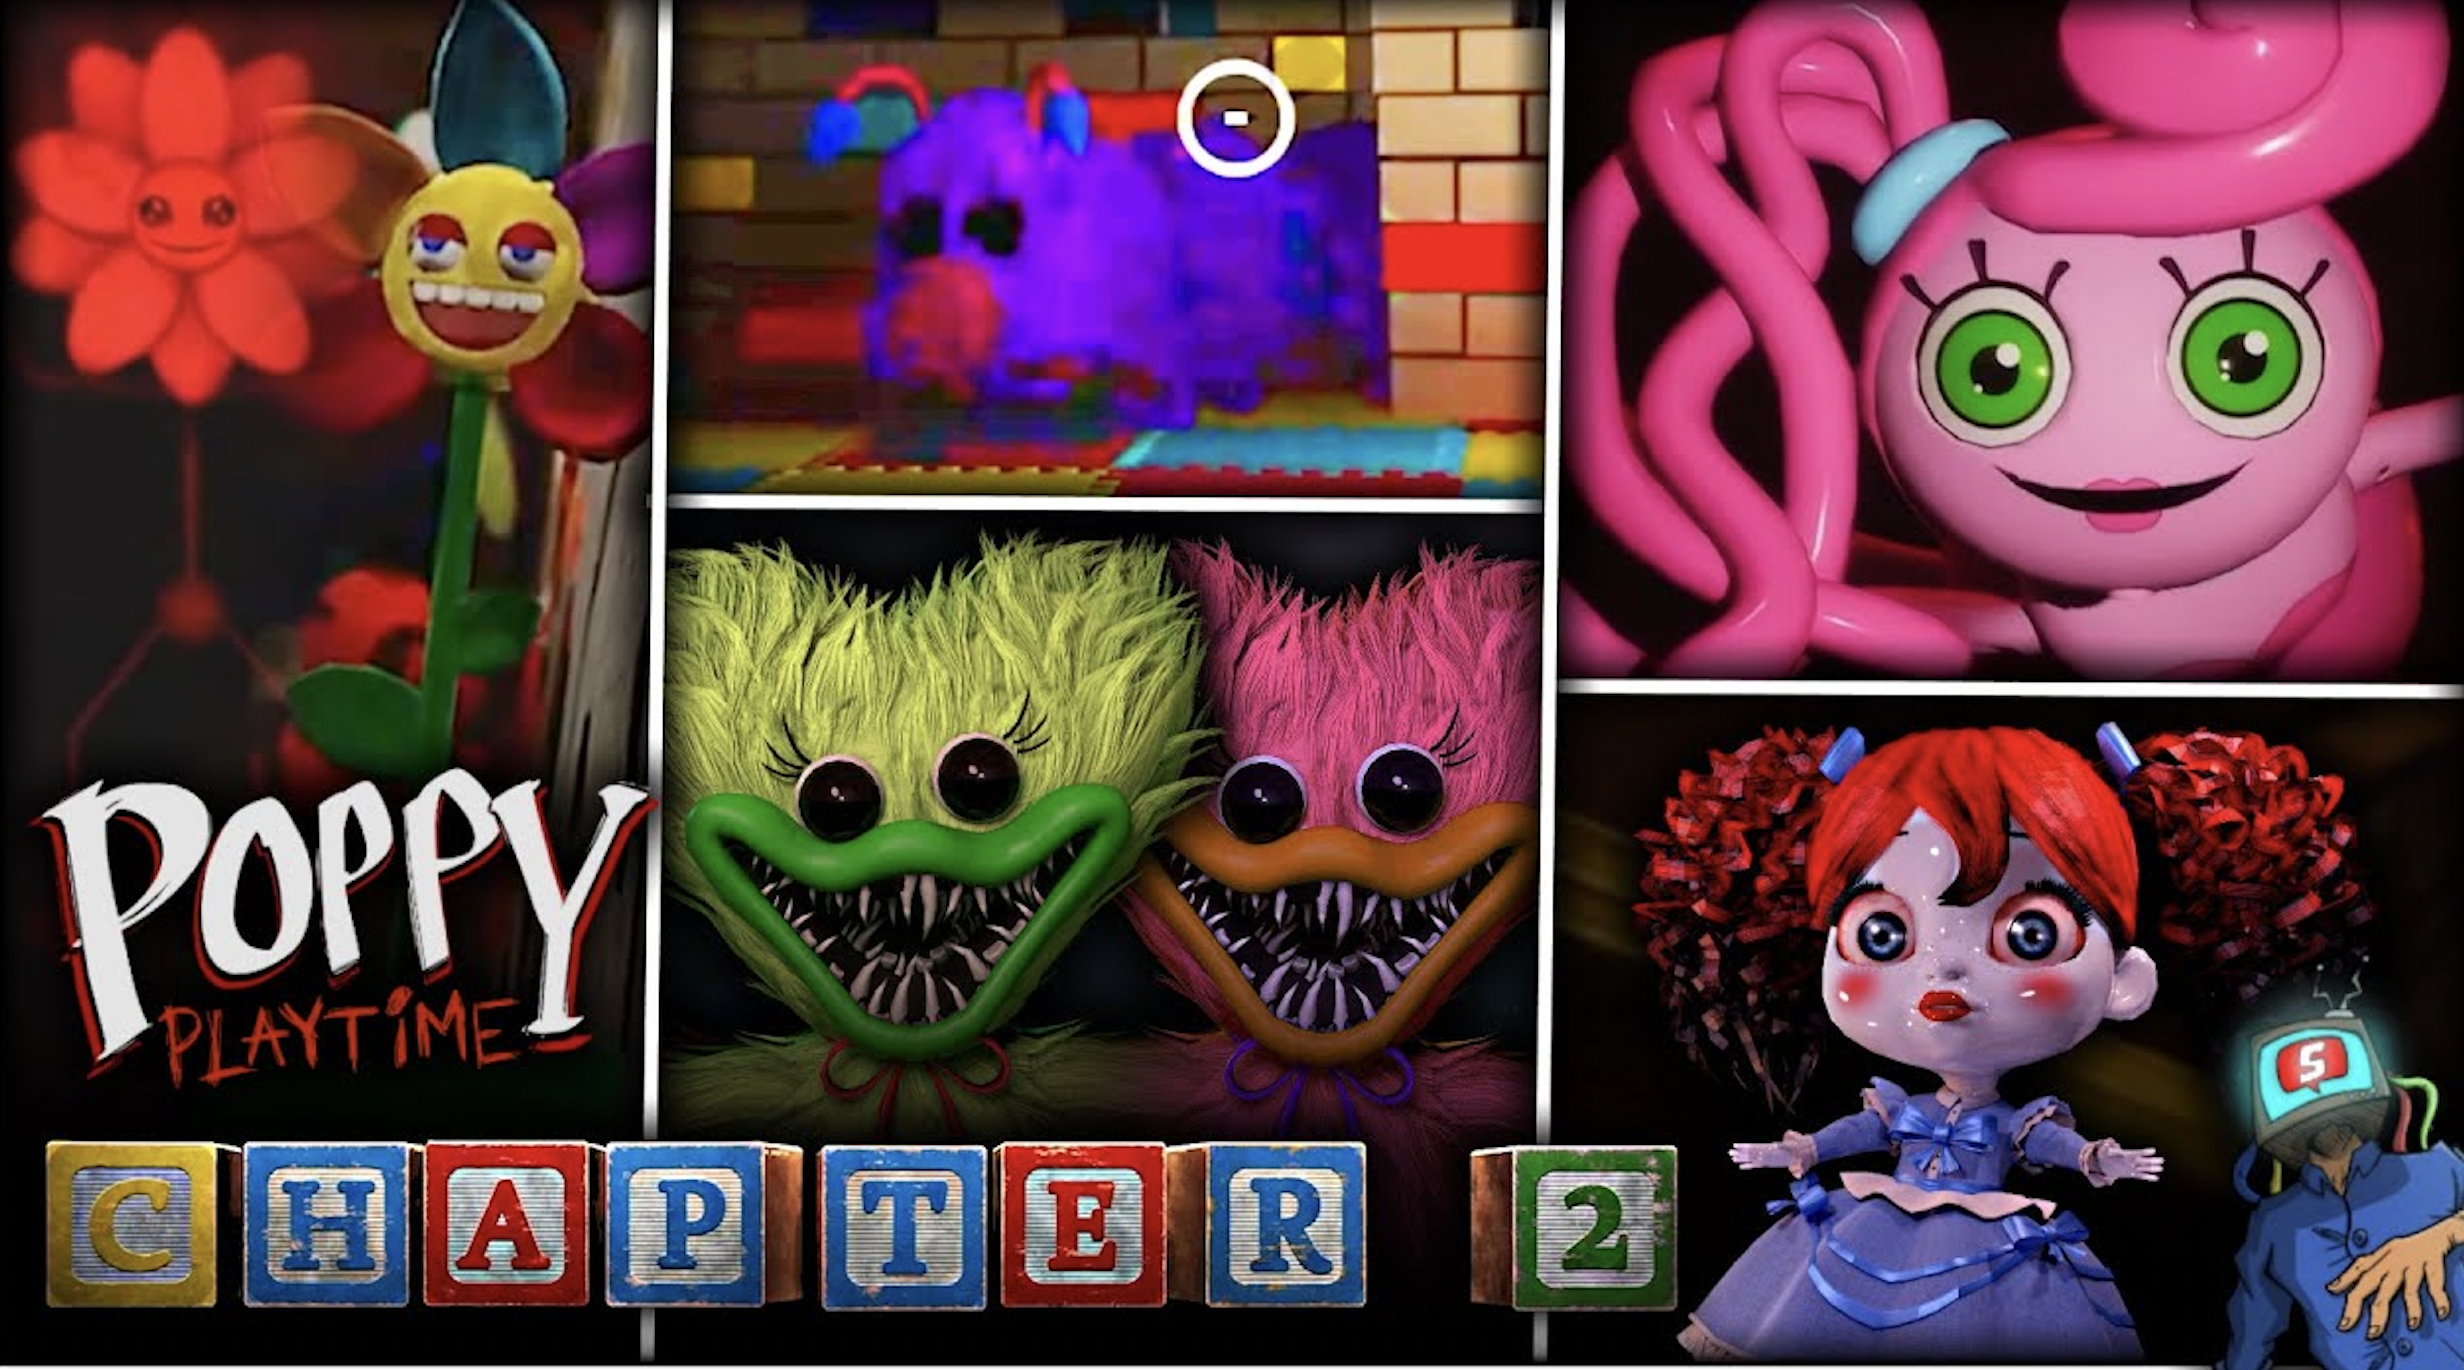 All the characters from poppy playtime